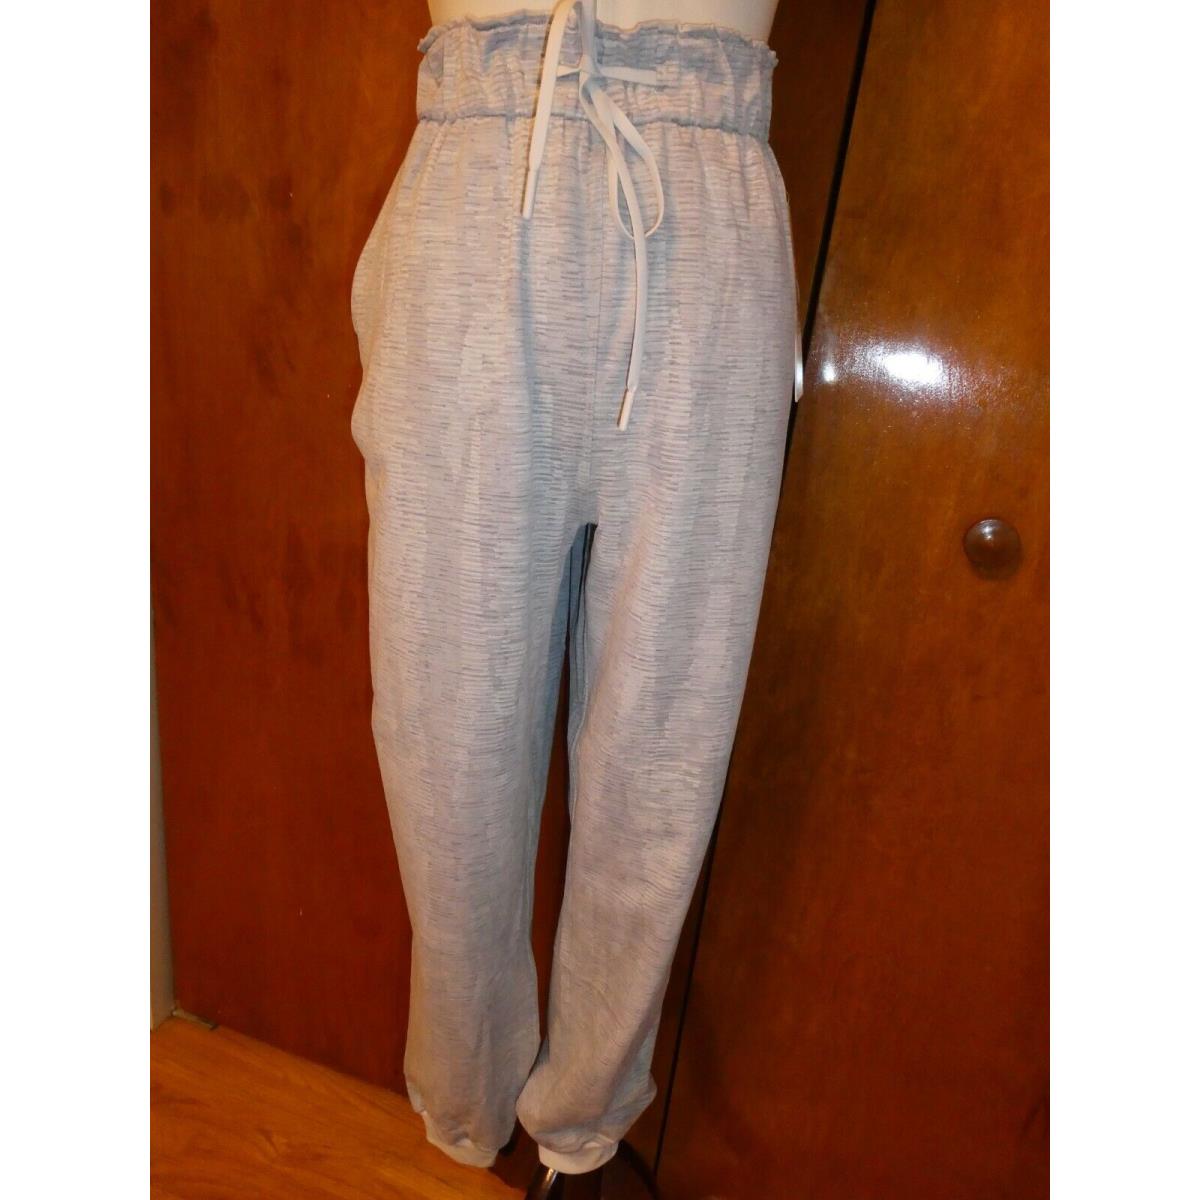 Lululemon Women`s Athletica Stretch High Rice Jogger Pant Gray Size 12